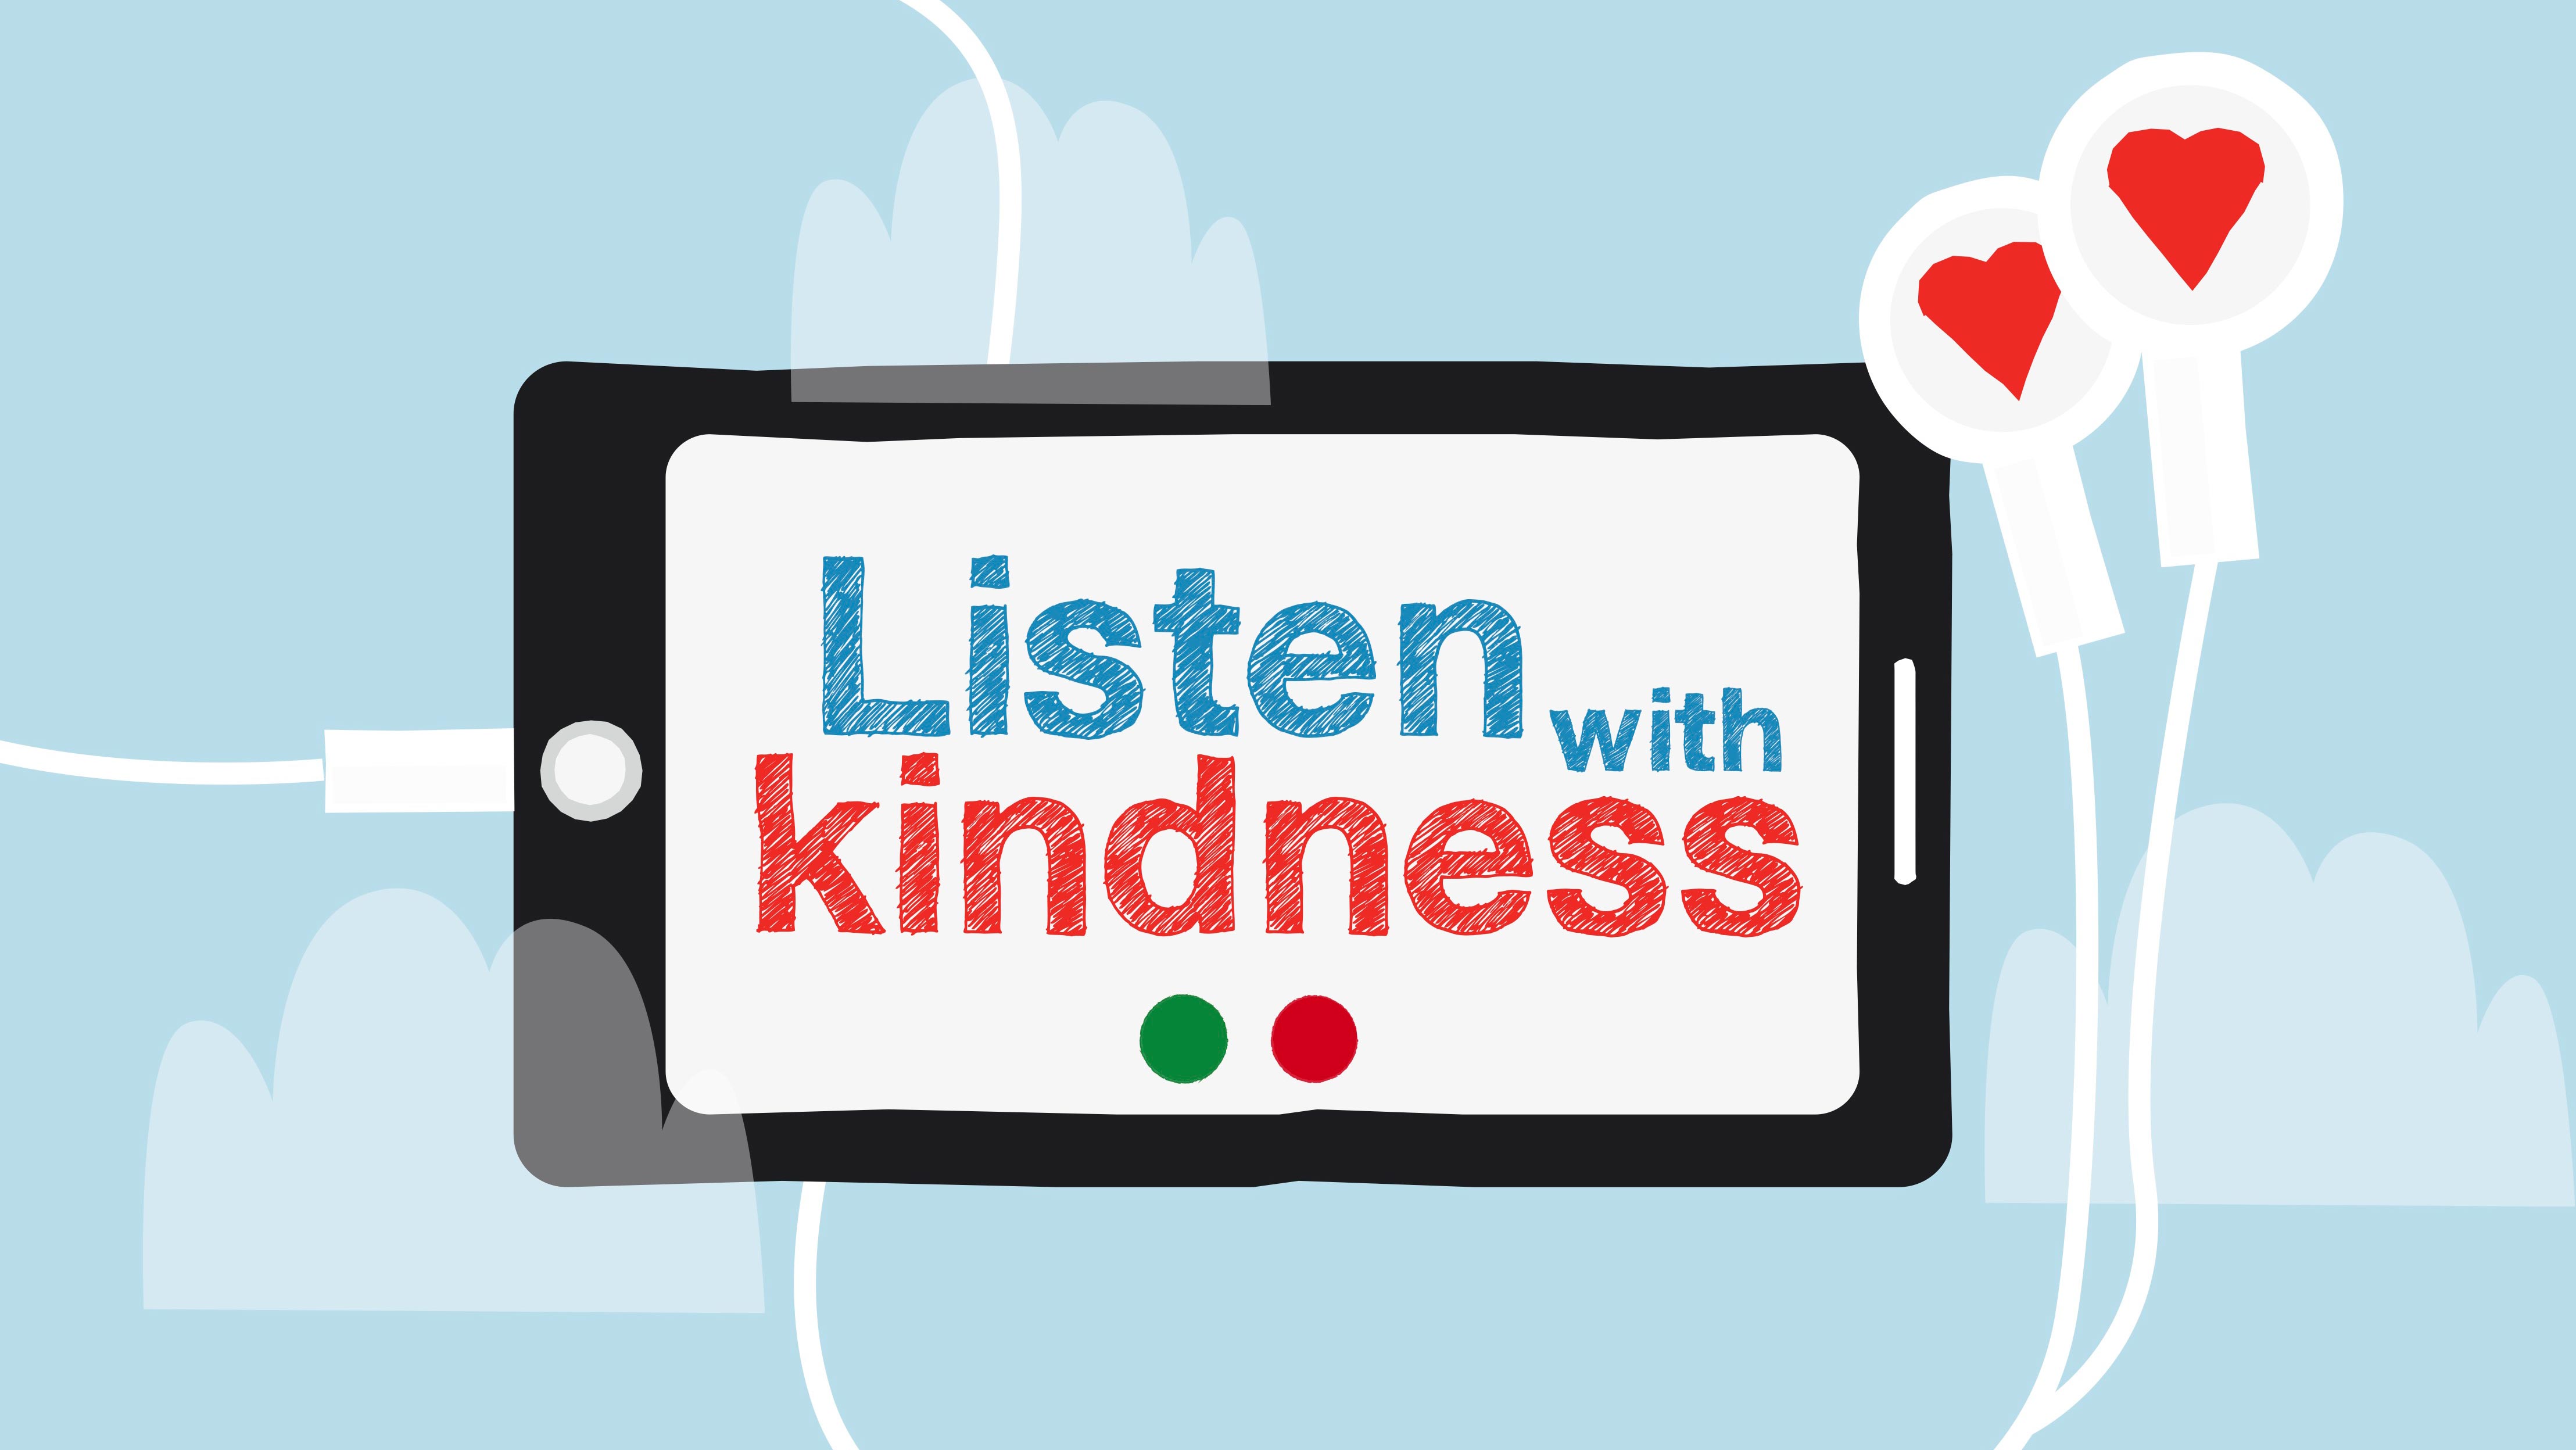 Illustration of a mobile phone with the words 'How to listen with kindness' on the screen.